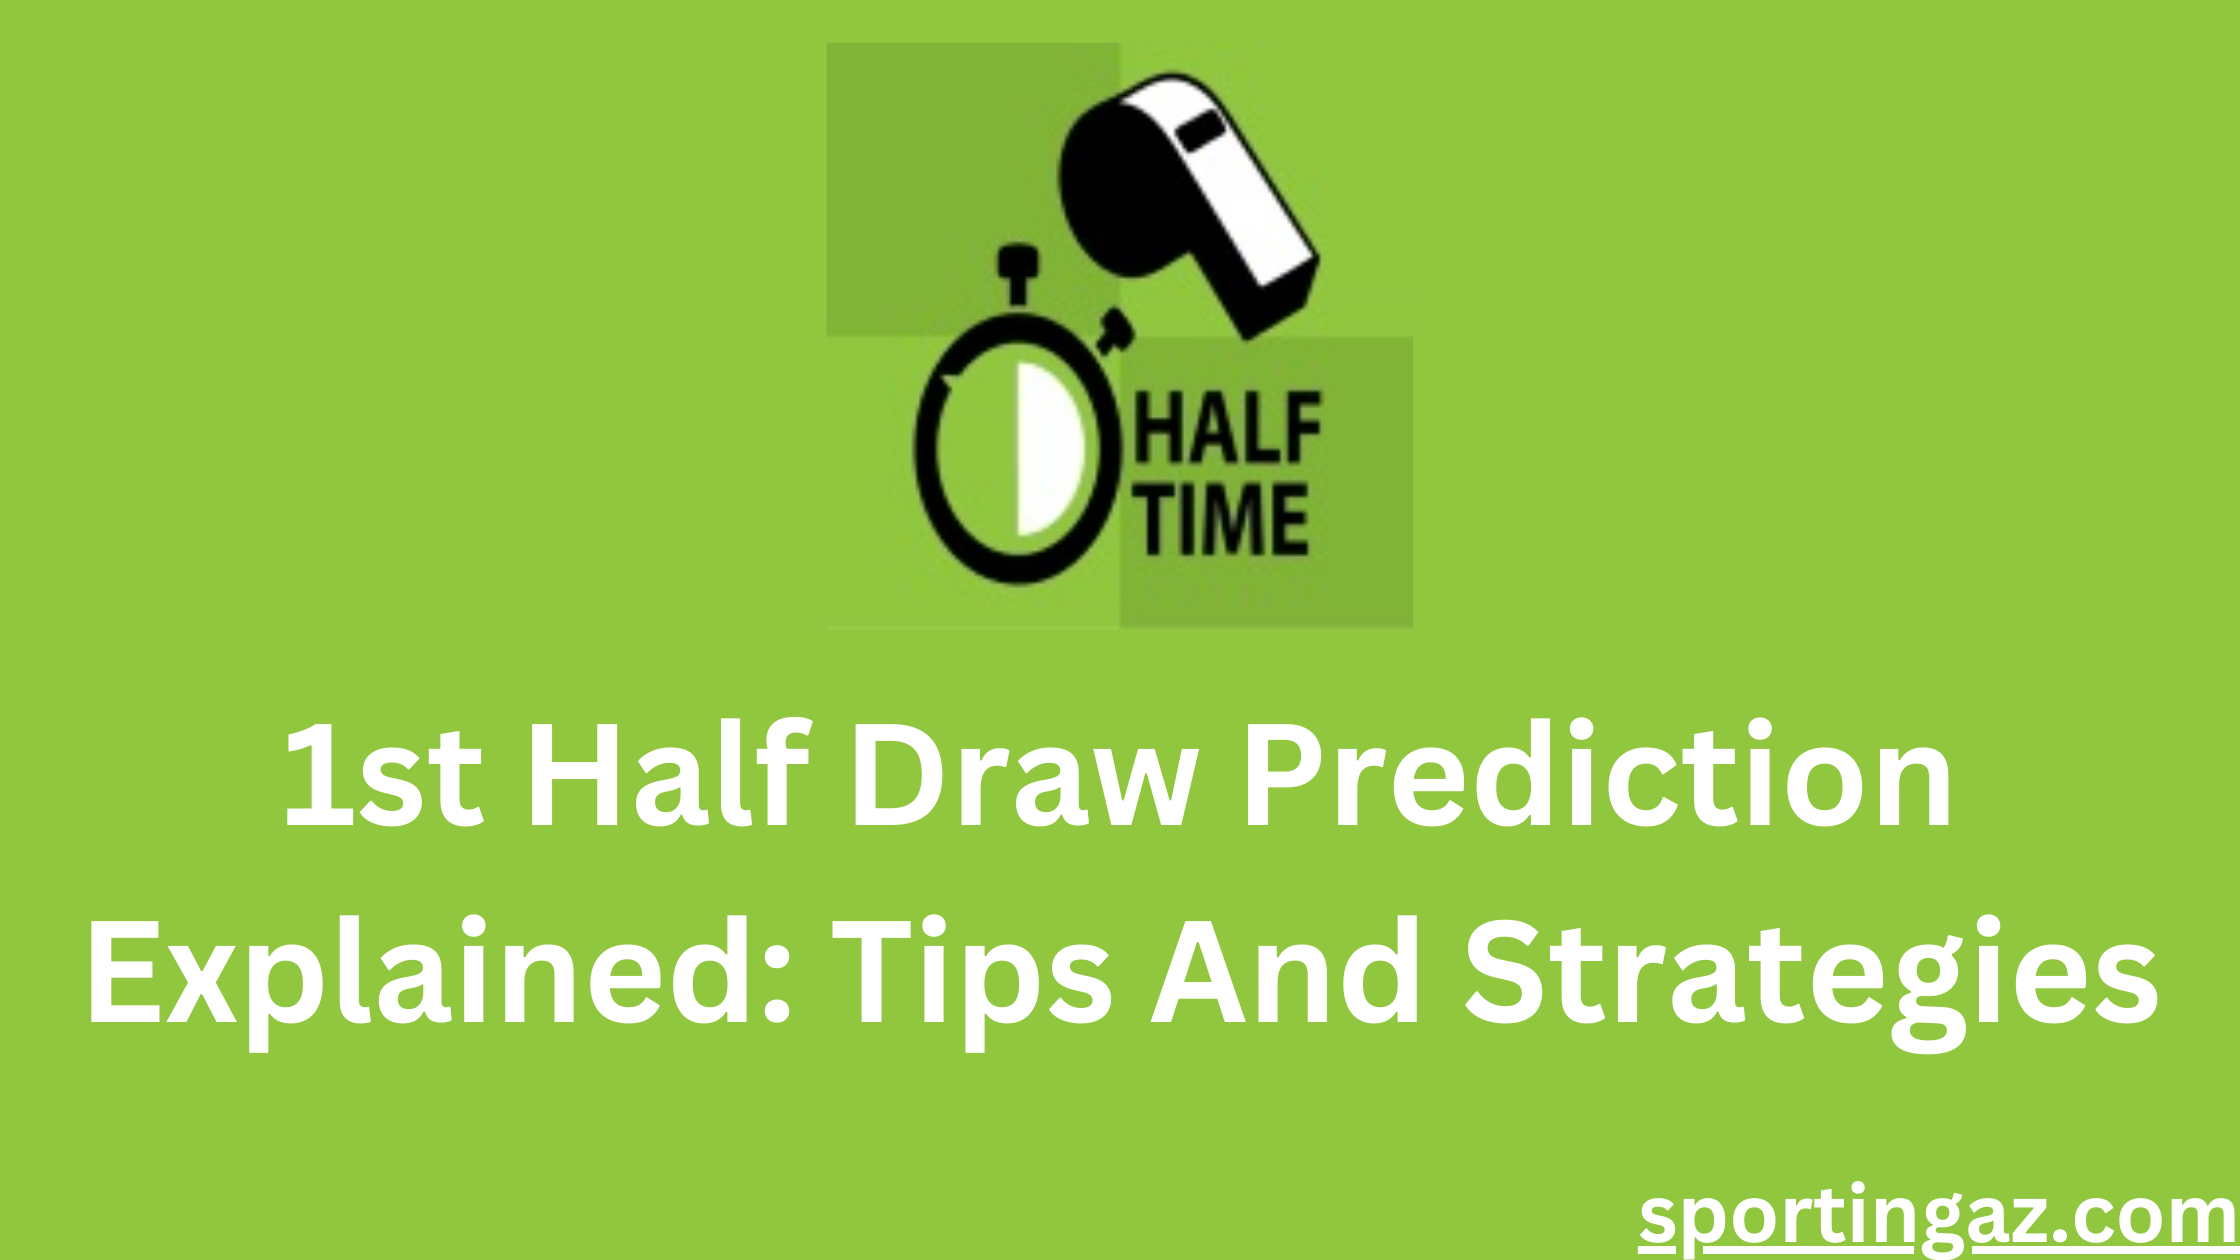 Mastering Draw Predictions - Unravelling The Best Leagues To